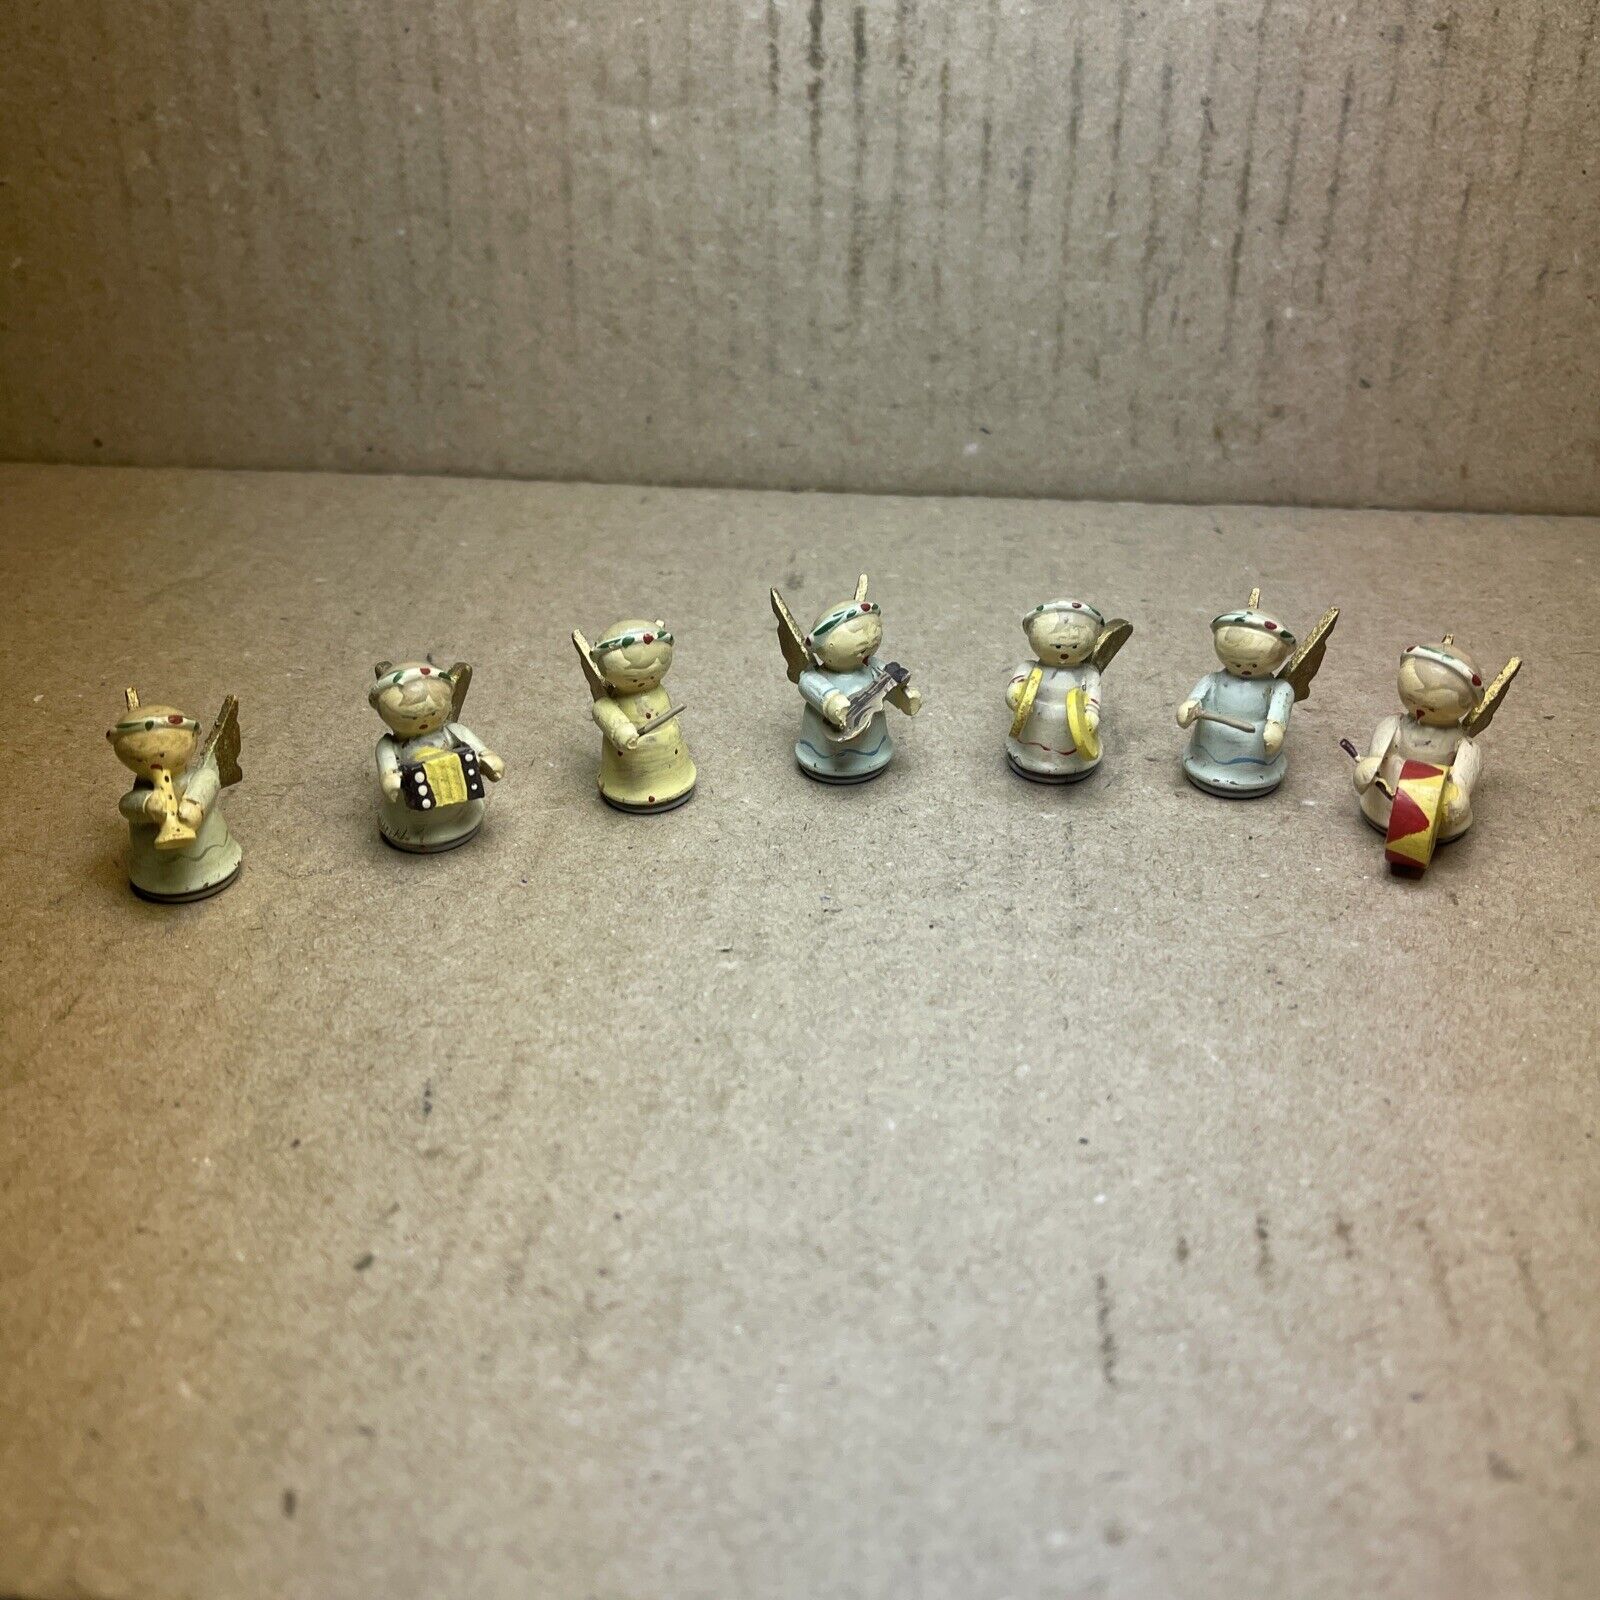 7 Miniature Mini Wood Wooden Angel Figurines Hand Painted Band Orchestra 1” HT